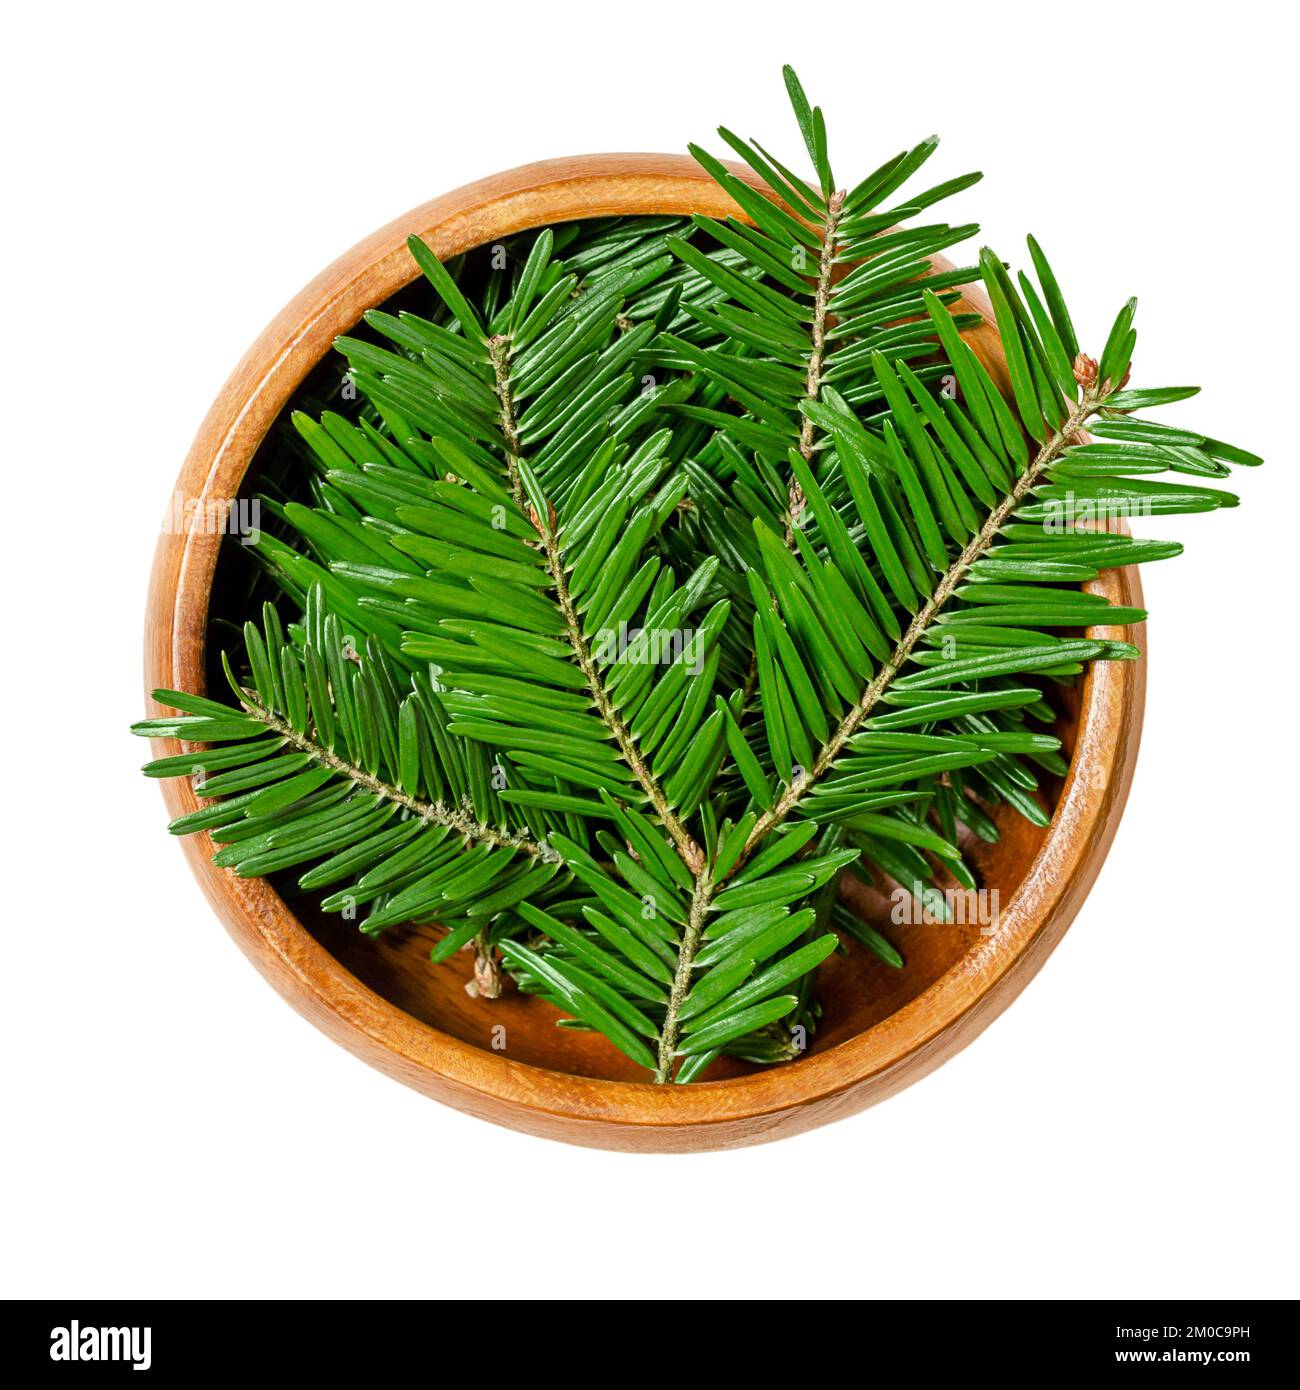 Small fir branches in a wooden bowl. Upper sides of fresh, green tips of European silver fir branches. Abies alba, an evergreen coniferous tree. Stock Photo